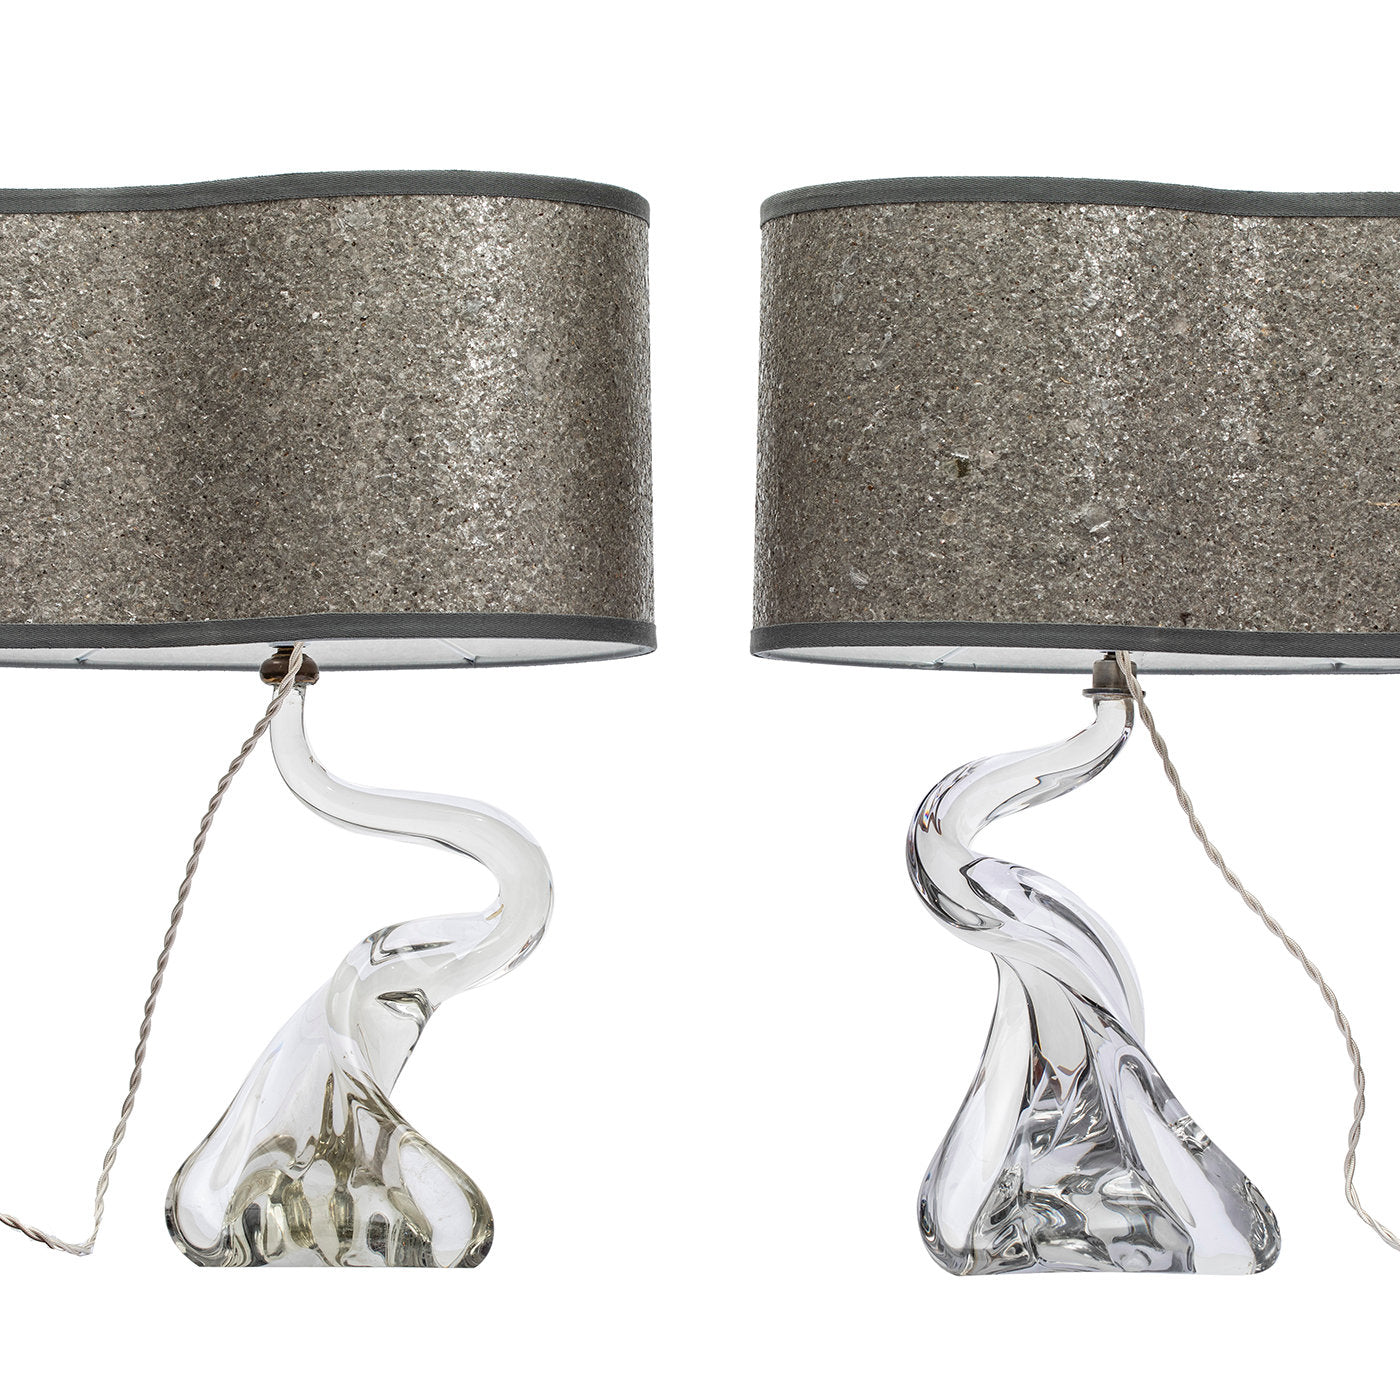 Set of 2 Crystal Table Lamps - Alternative view 1